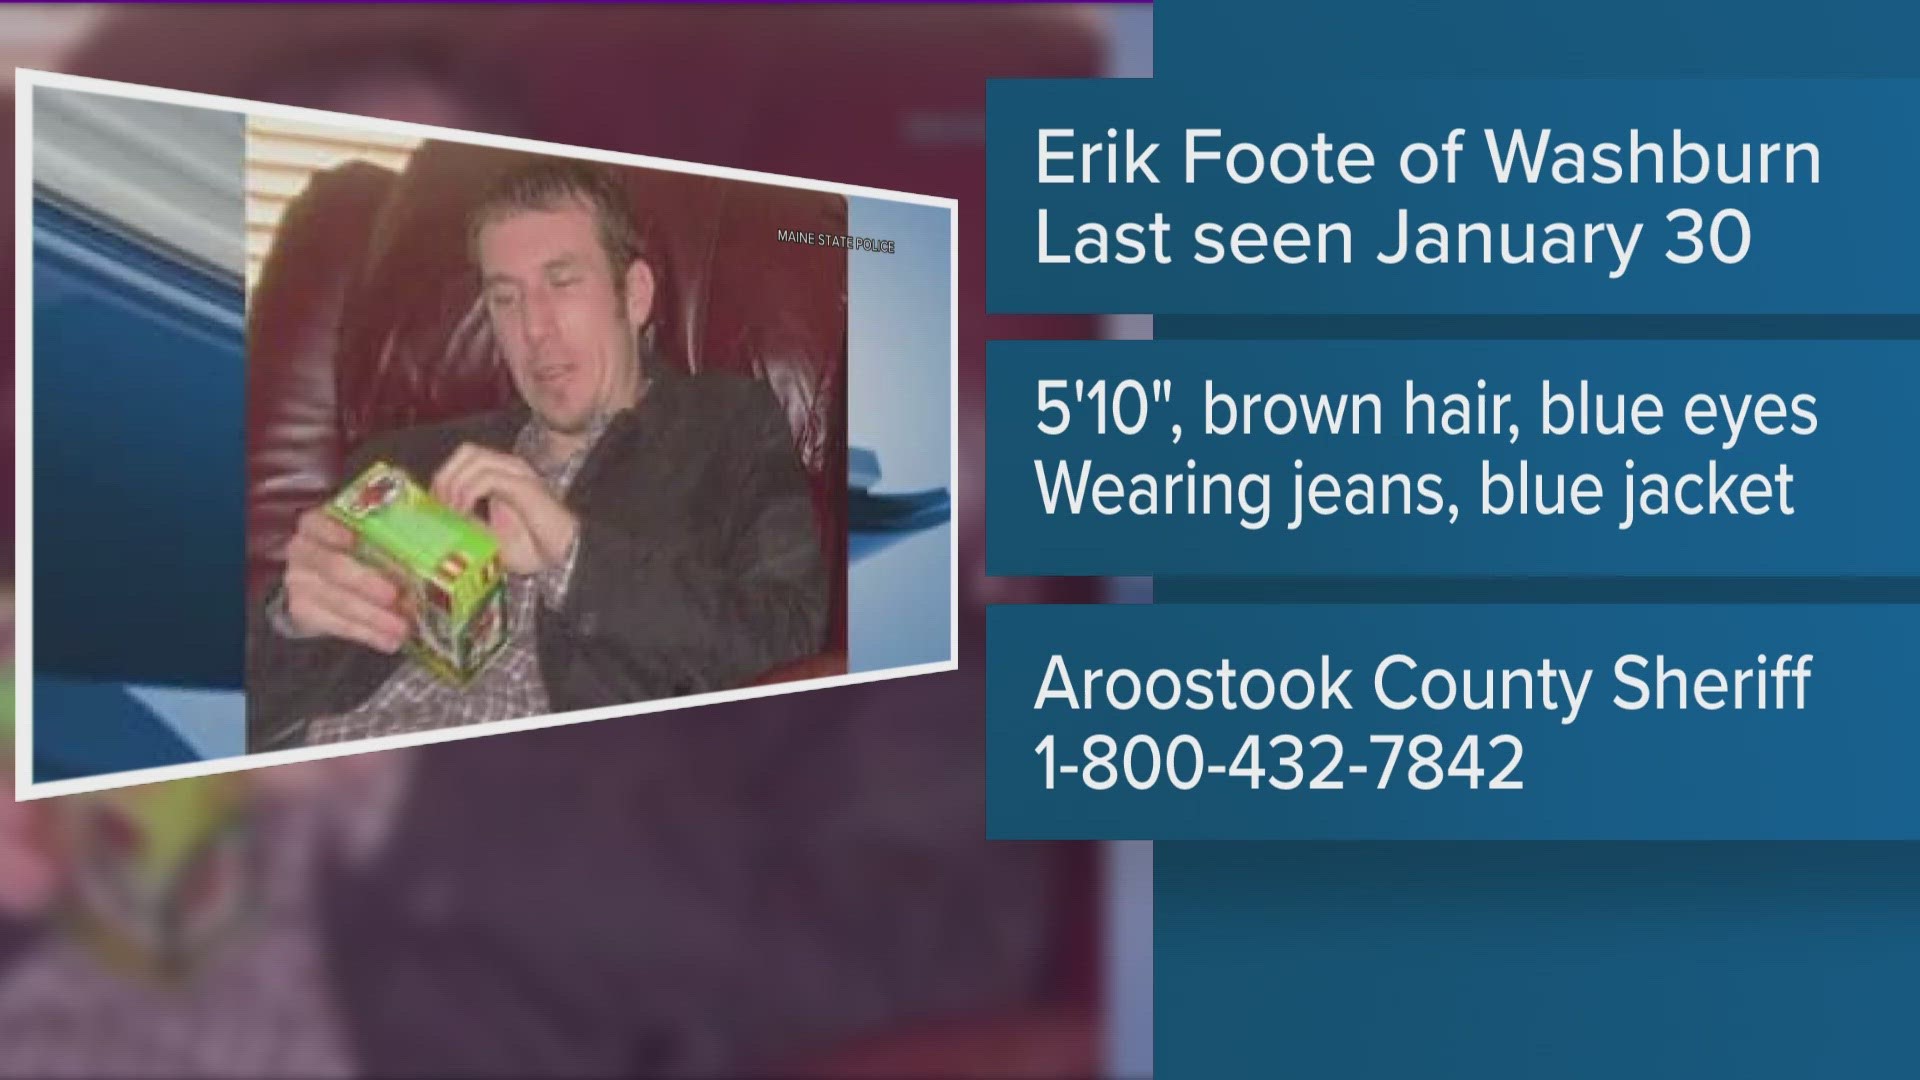 Erik Foote was last seen in the vicinity of Freshies in Presque Isle, the Aroostook County Sheriff's Office said.